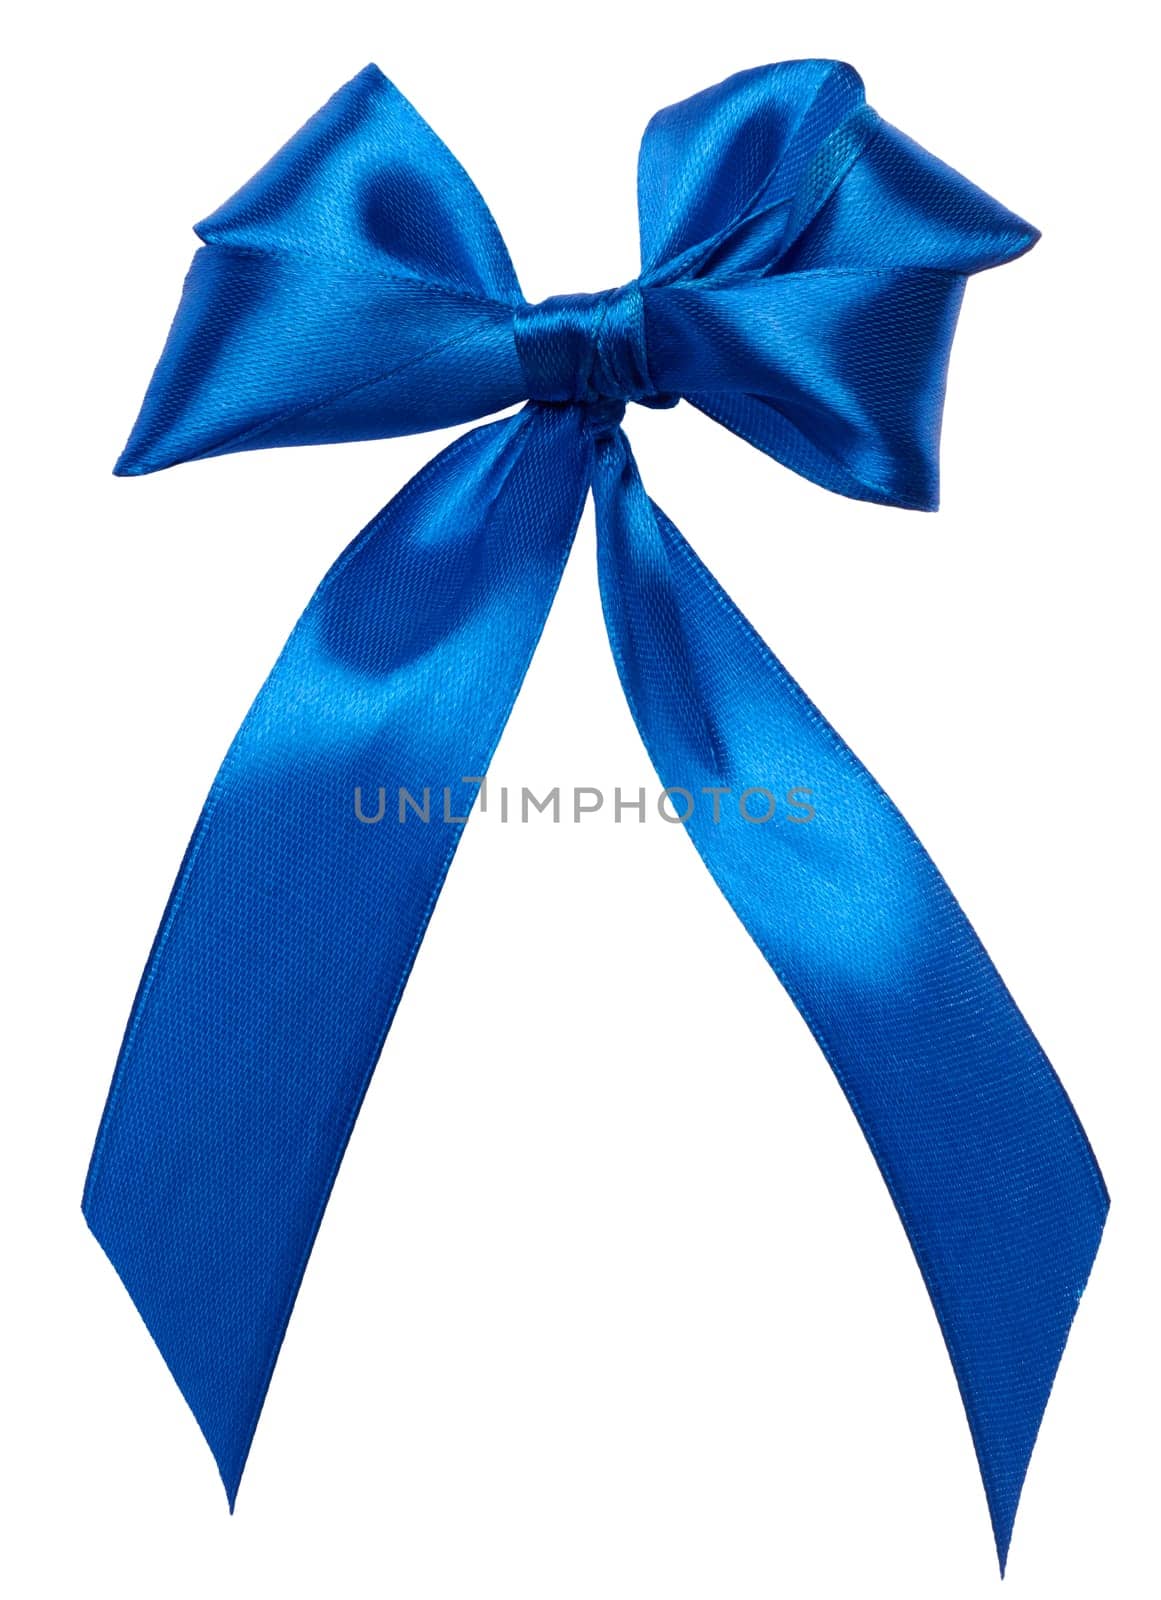 Tied bow made of blue silk ribbon on an isolated background by ndanko